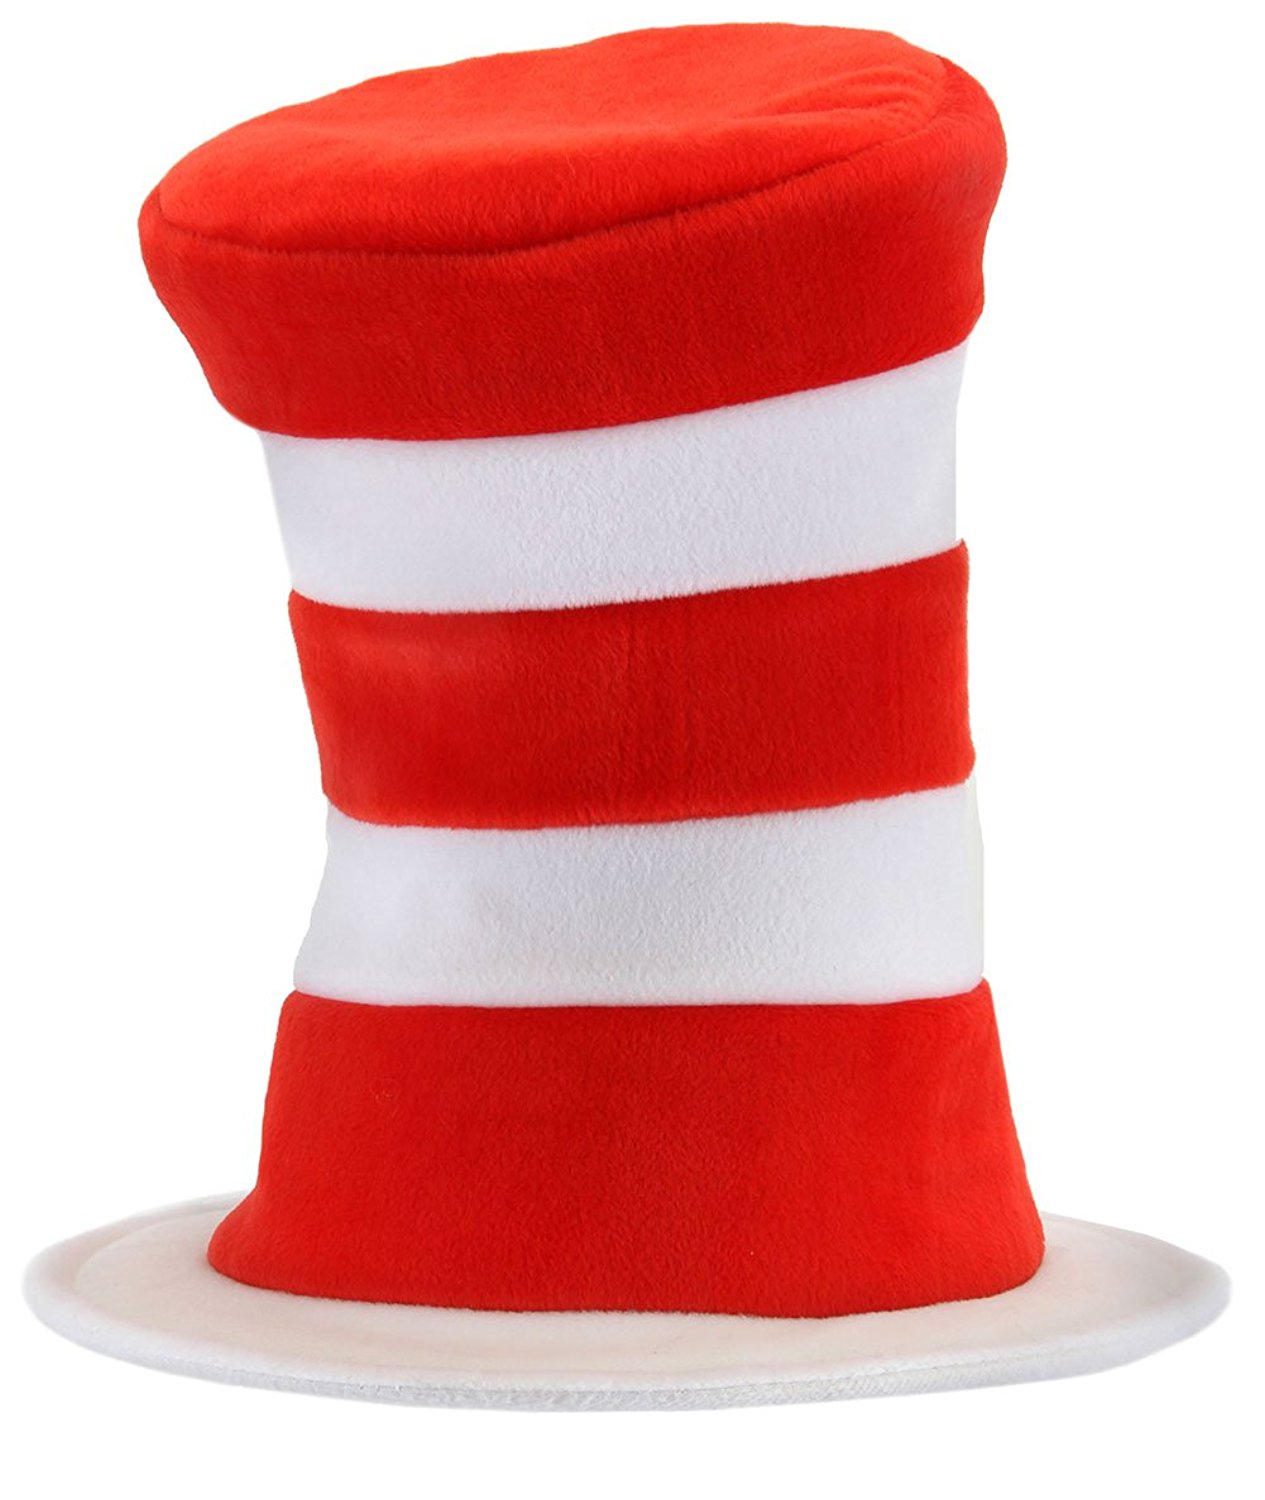 dr-seuss-hat-free-download-on-clipartmag